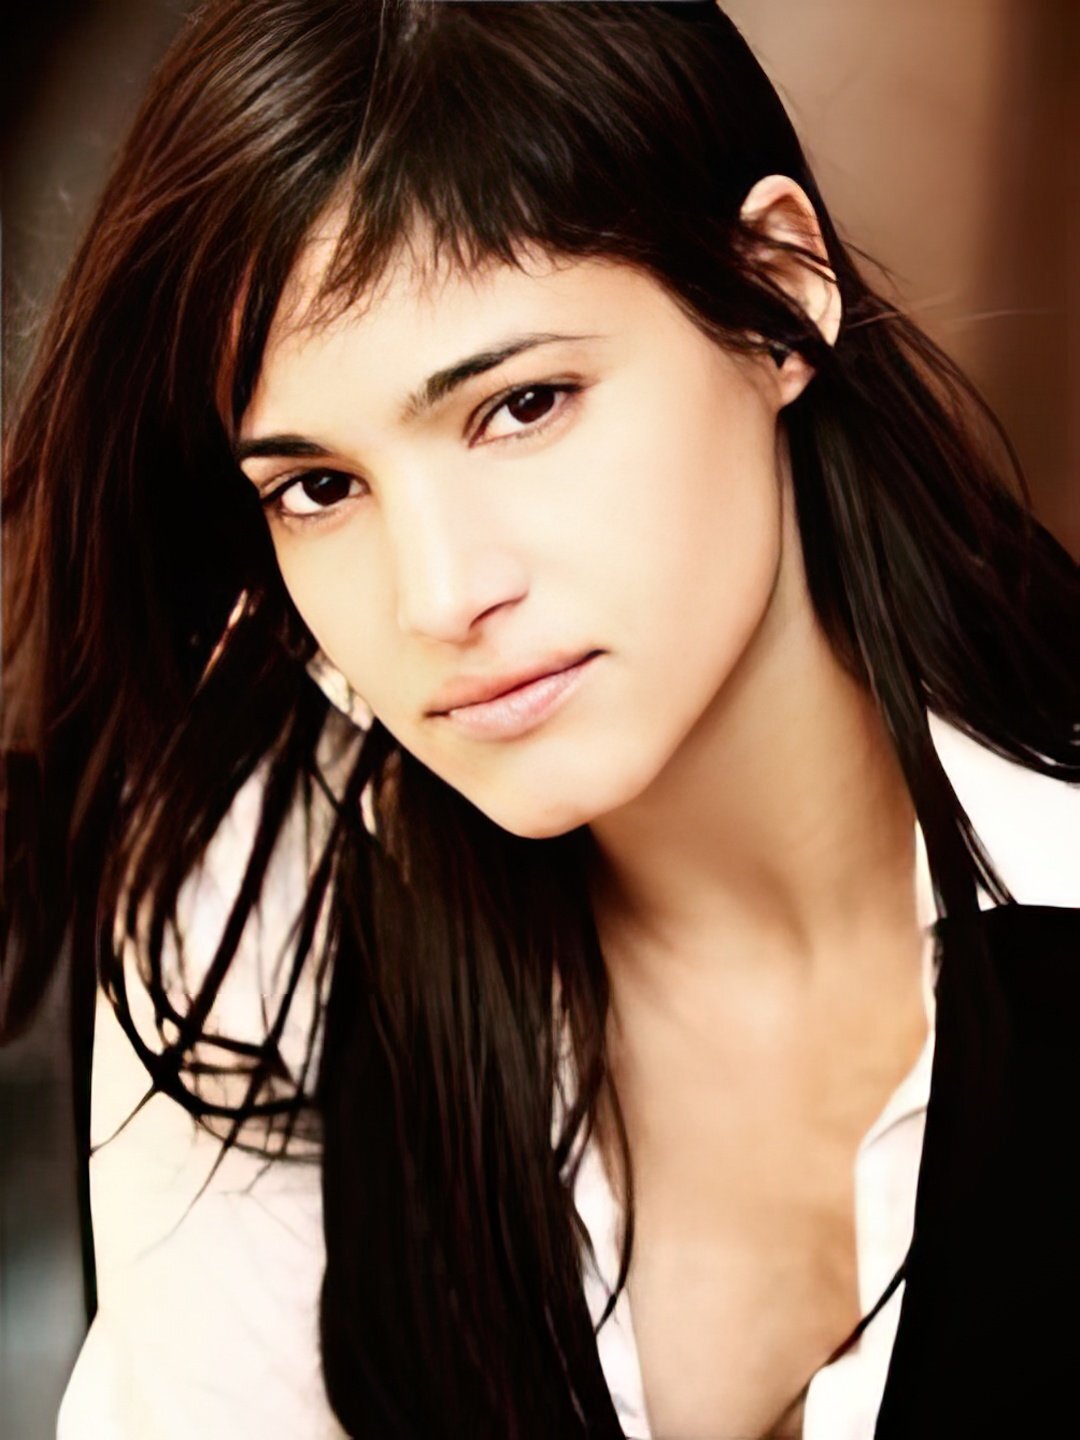 Sofia Boutella where is she now